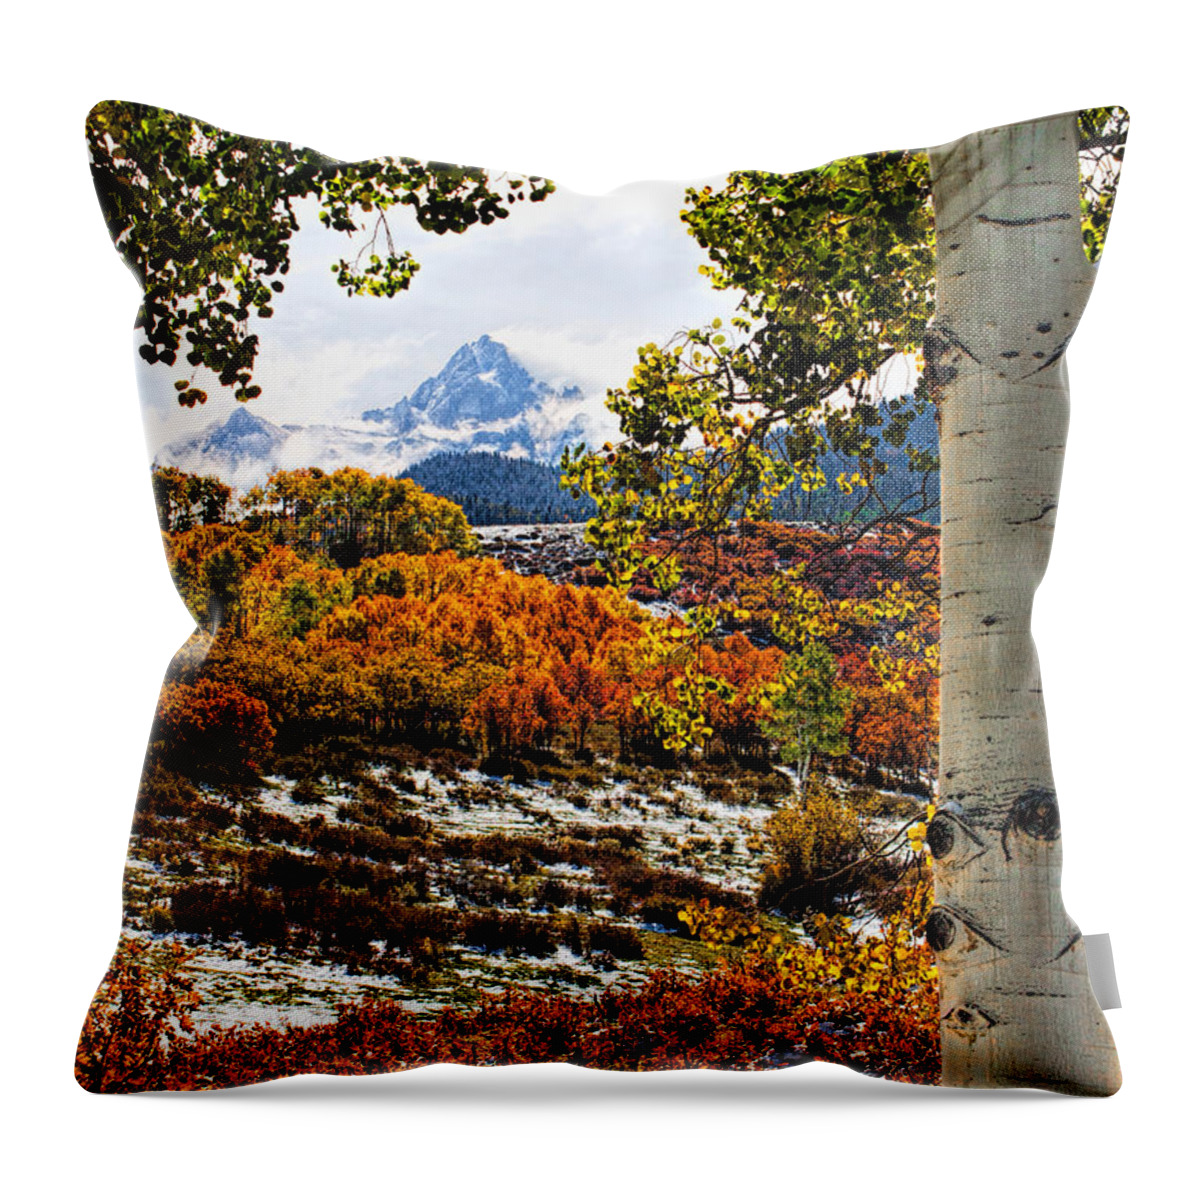 Autum Throw Pillow featuring the photograph Viewed Through the Aspen Leaves by Rick Wicker